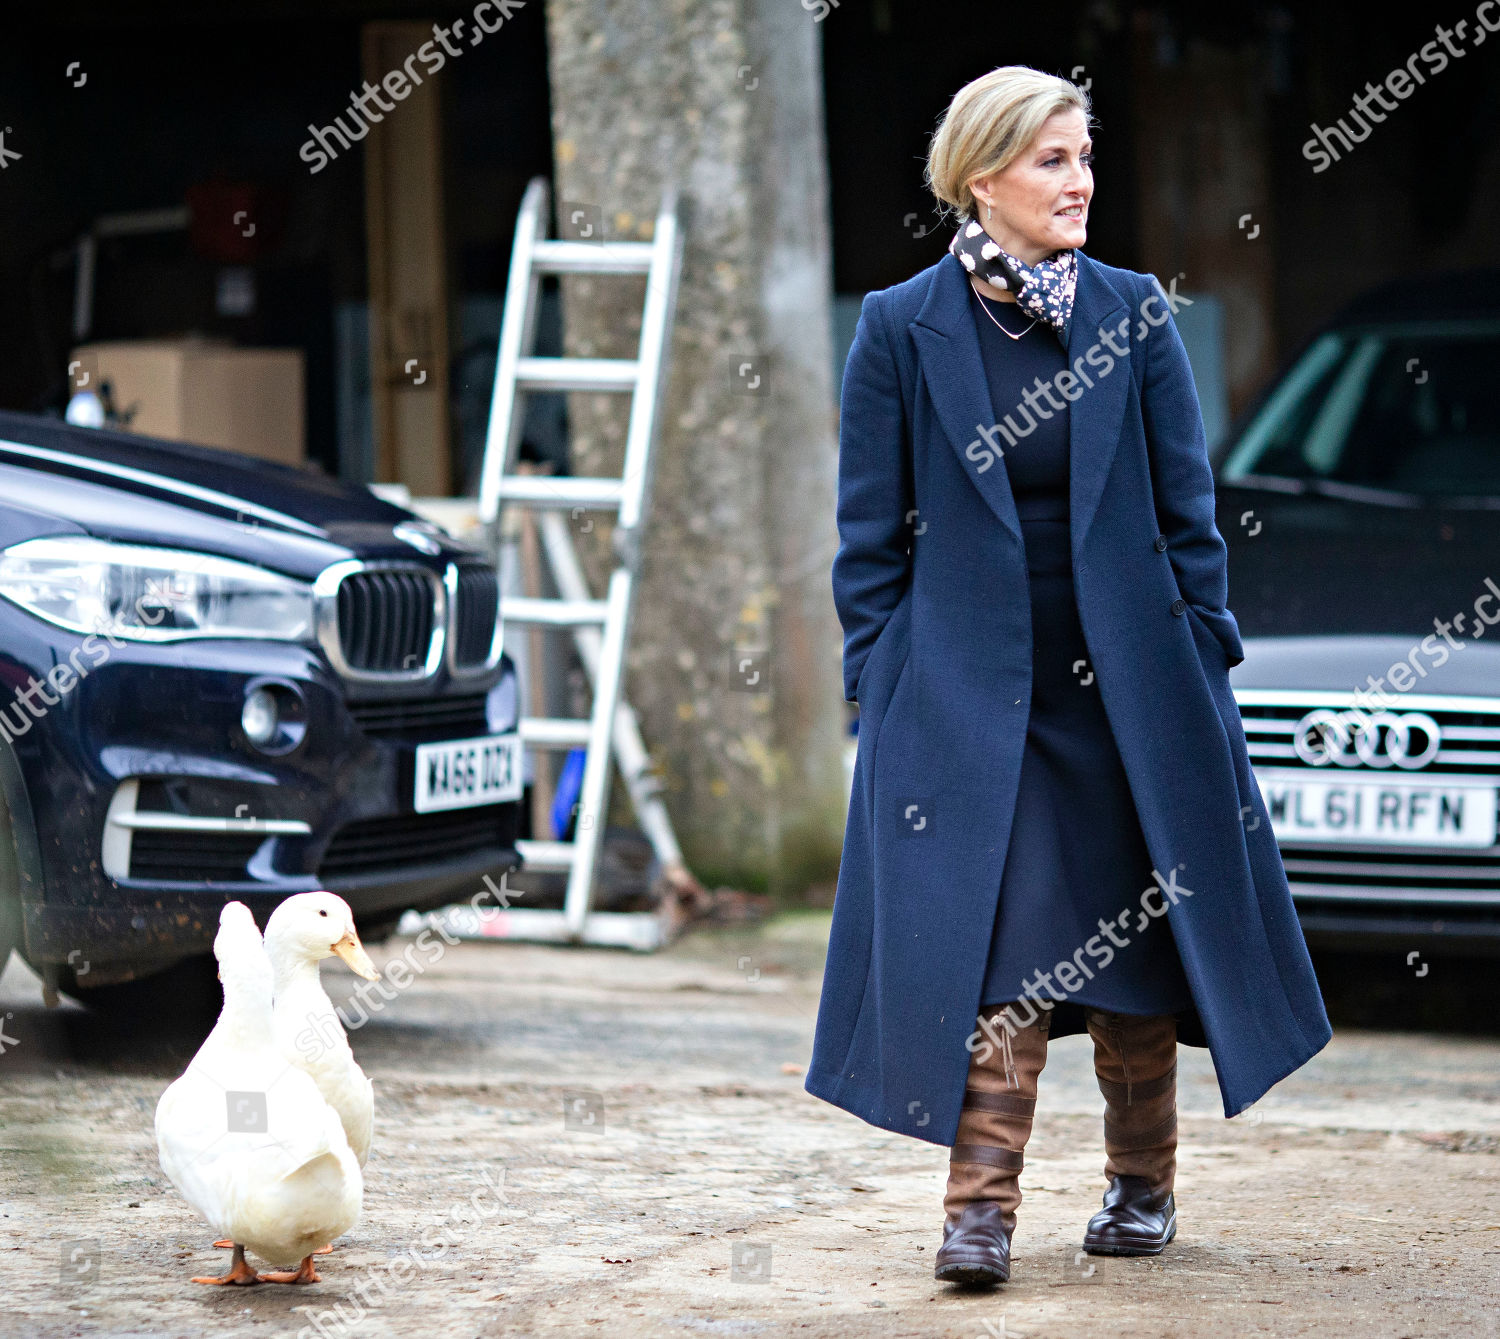 sophie-countess-of-wessex-visit-to-cornwall-uk-shutterstock-editorial-10013548aa.jpg